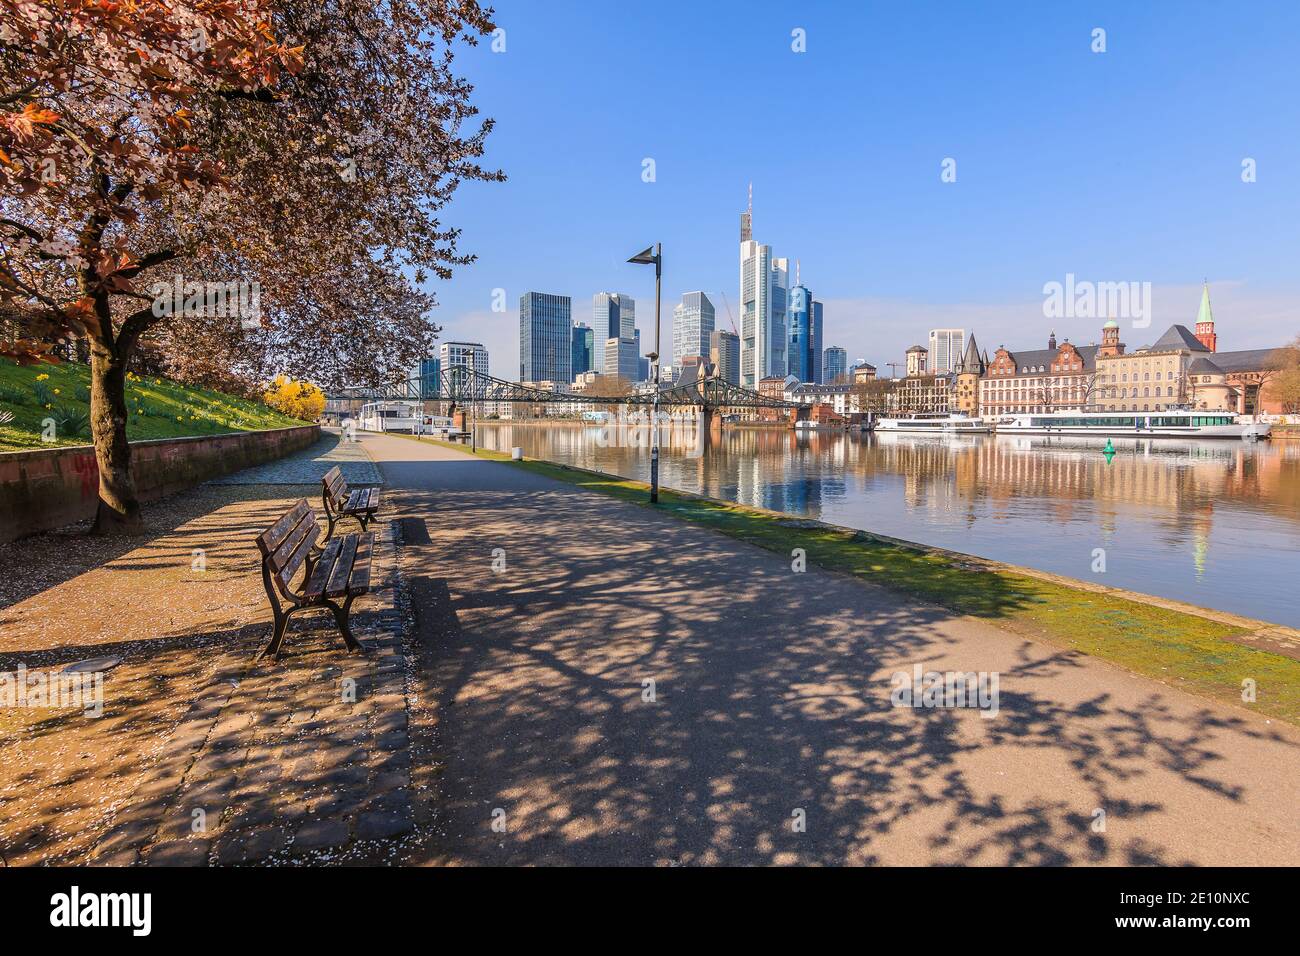 Riverside path on the river Main in Frankfurt. Tree with flowers and benches in spring. Skyscrapers in the financial district with reflections Stock Photo